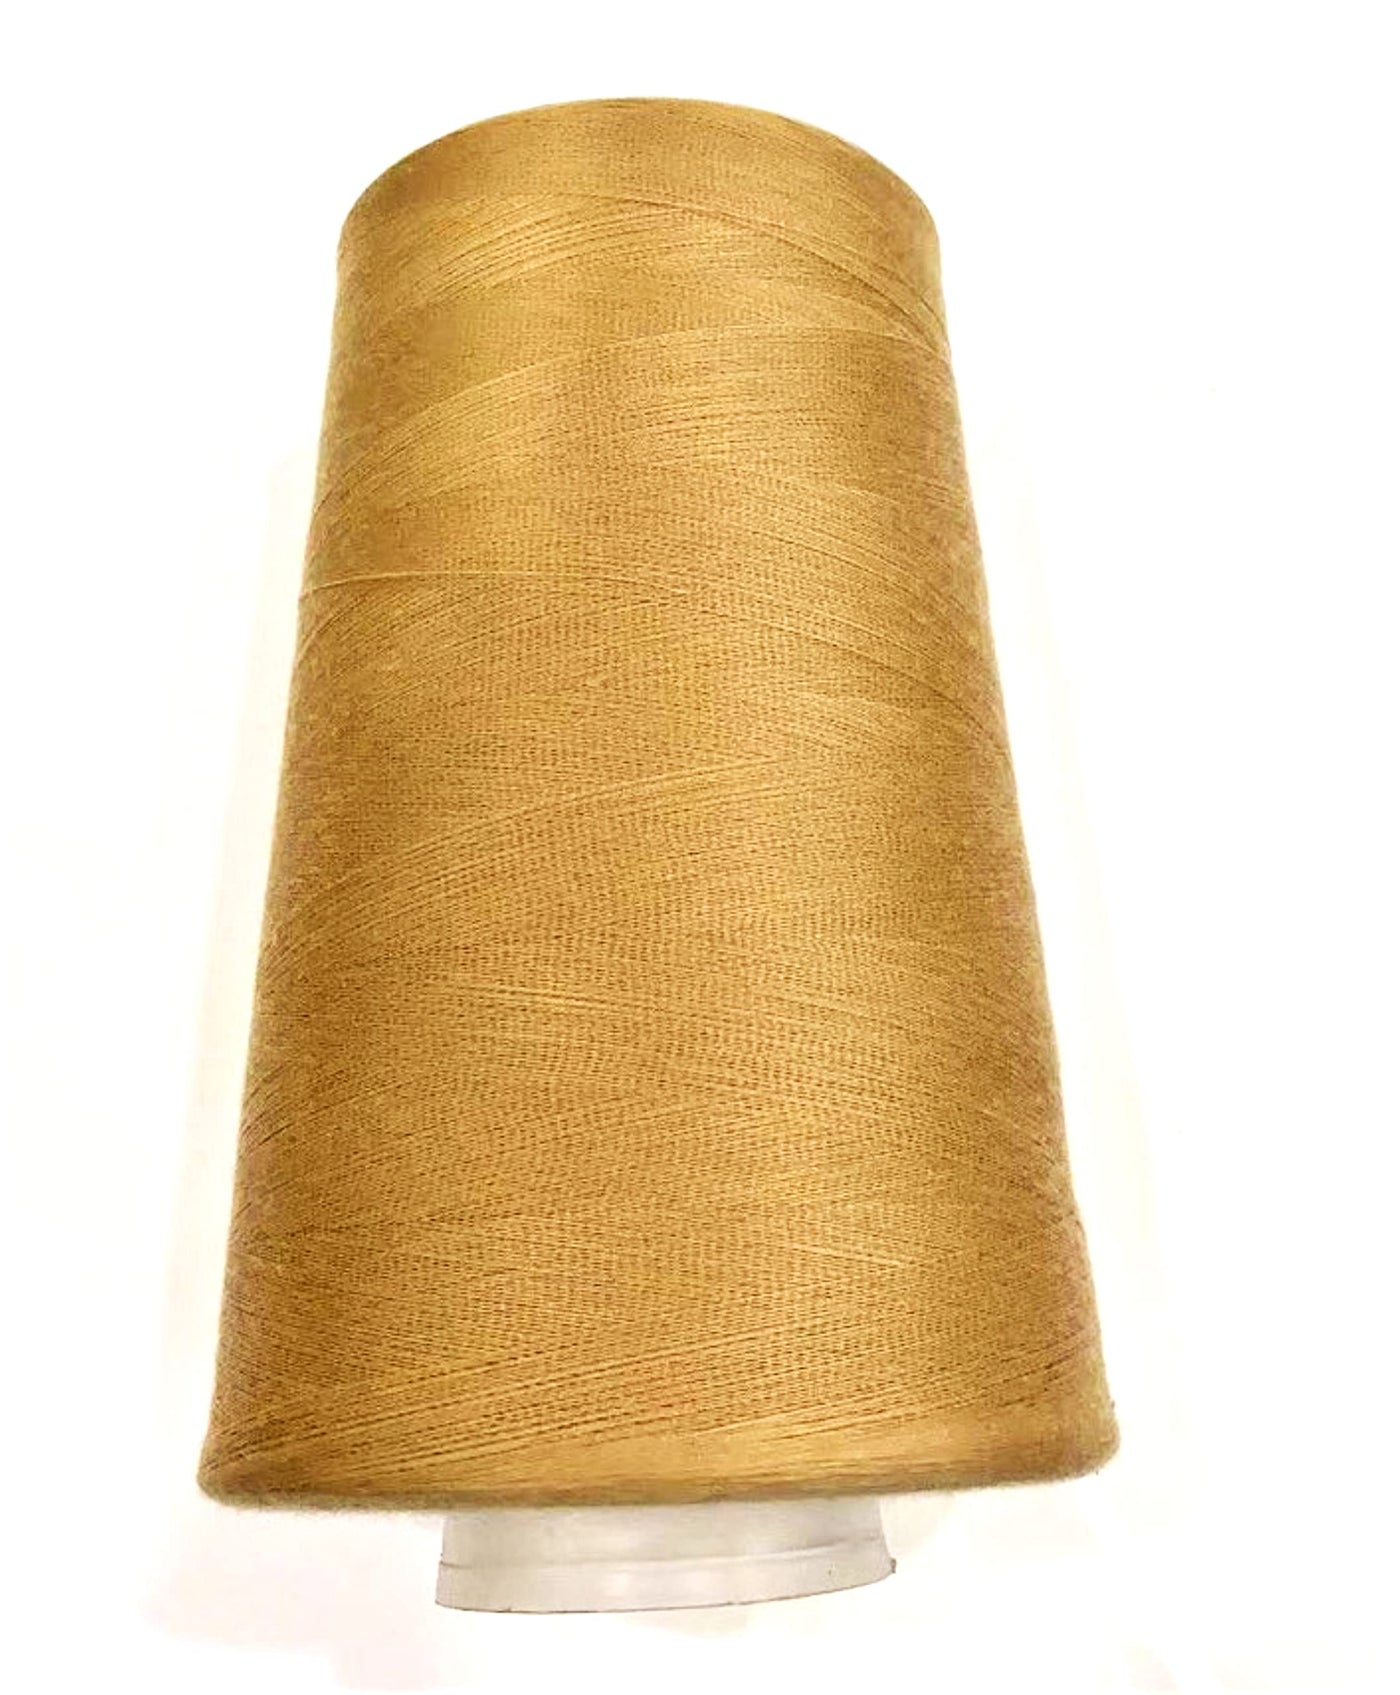 Jumbo Spool of Polyester Textured Sewing Thread fine Count for Serger / Overlock Machine 60/2 – 0.1mm Jumbo Spool Total Length : 25632 Yard. Weight: 1.1 Lbs